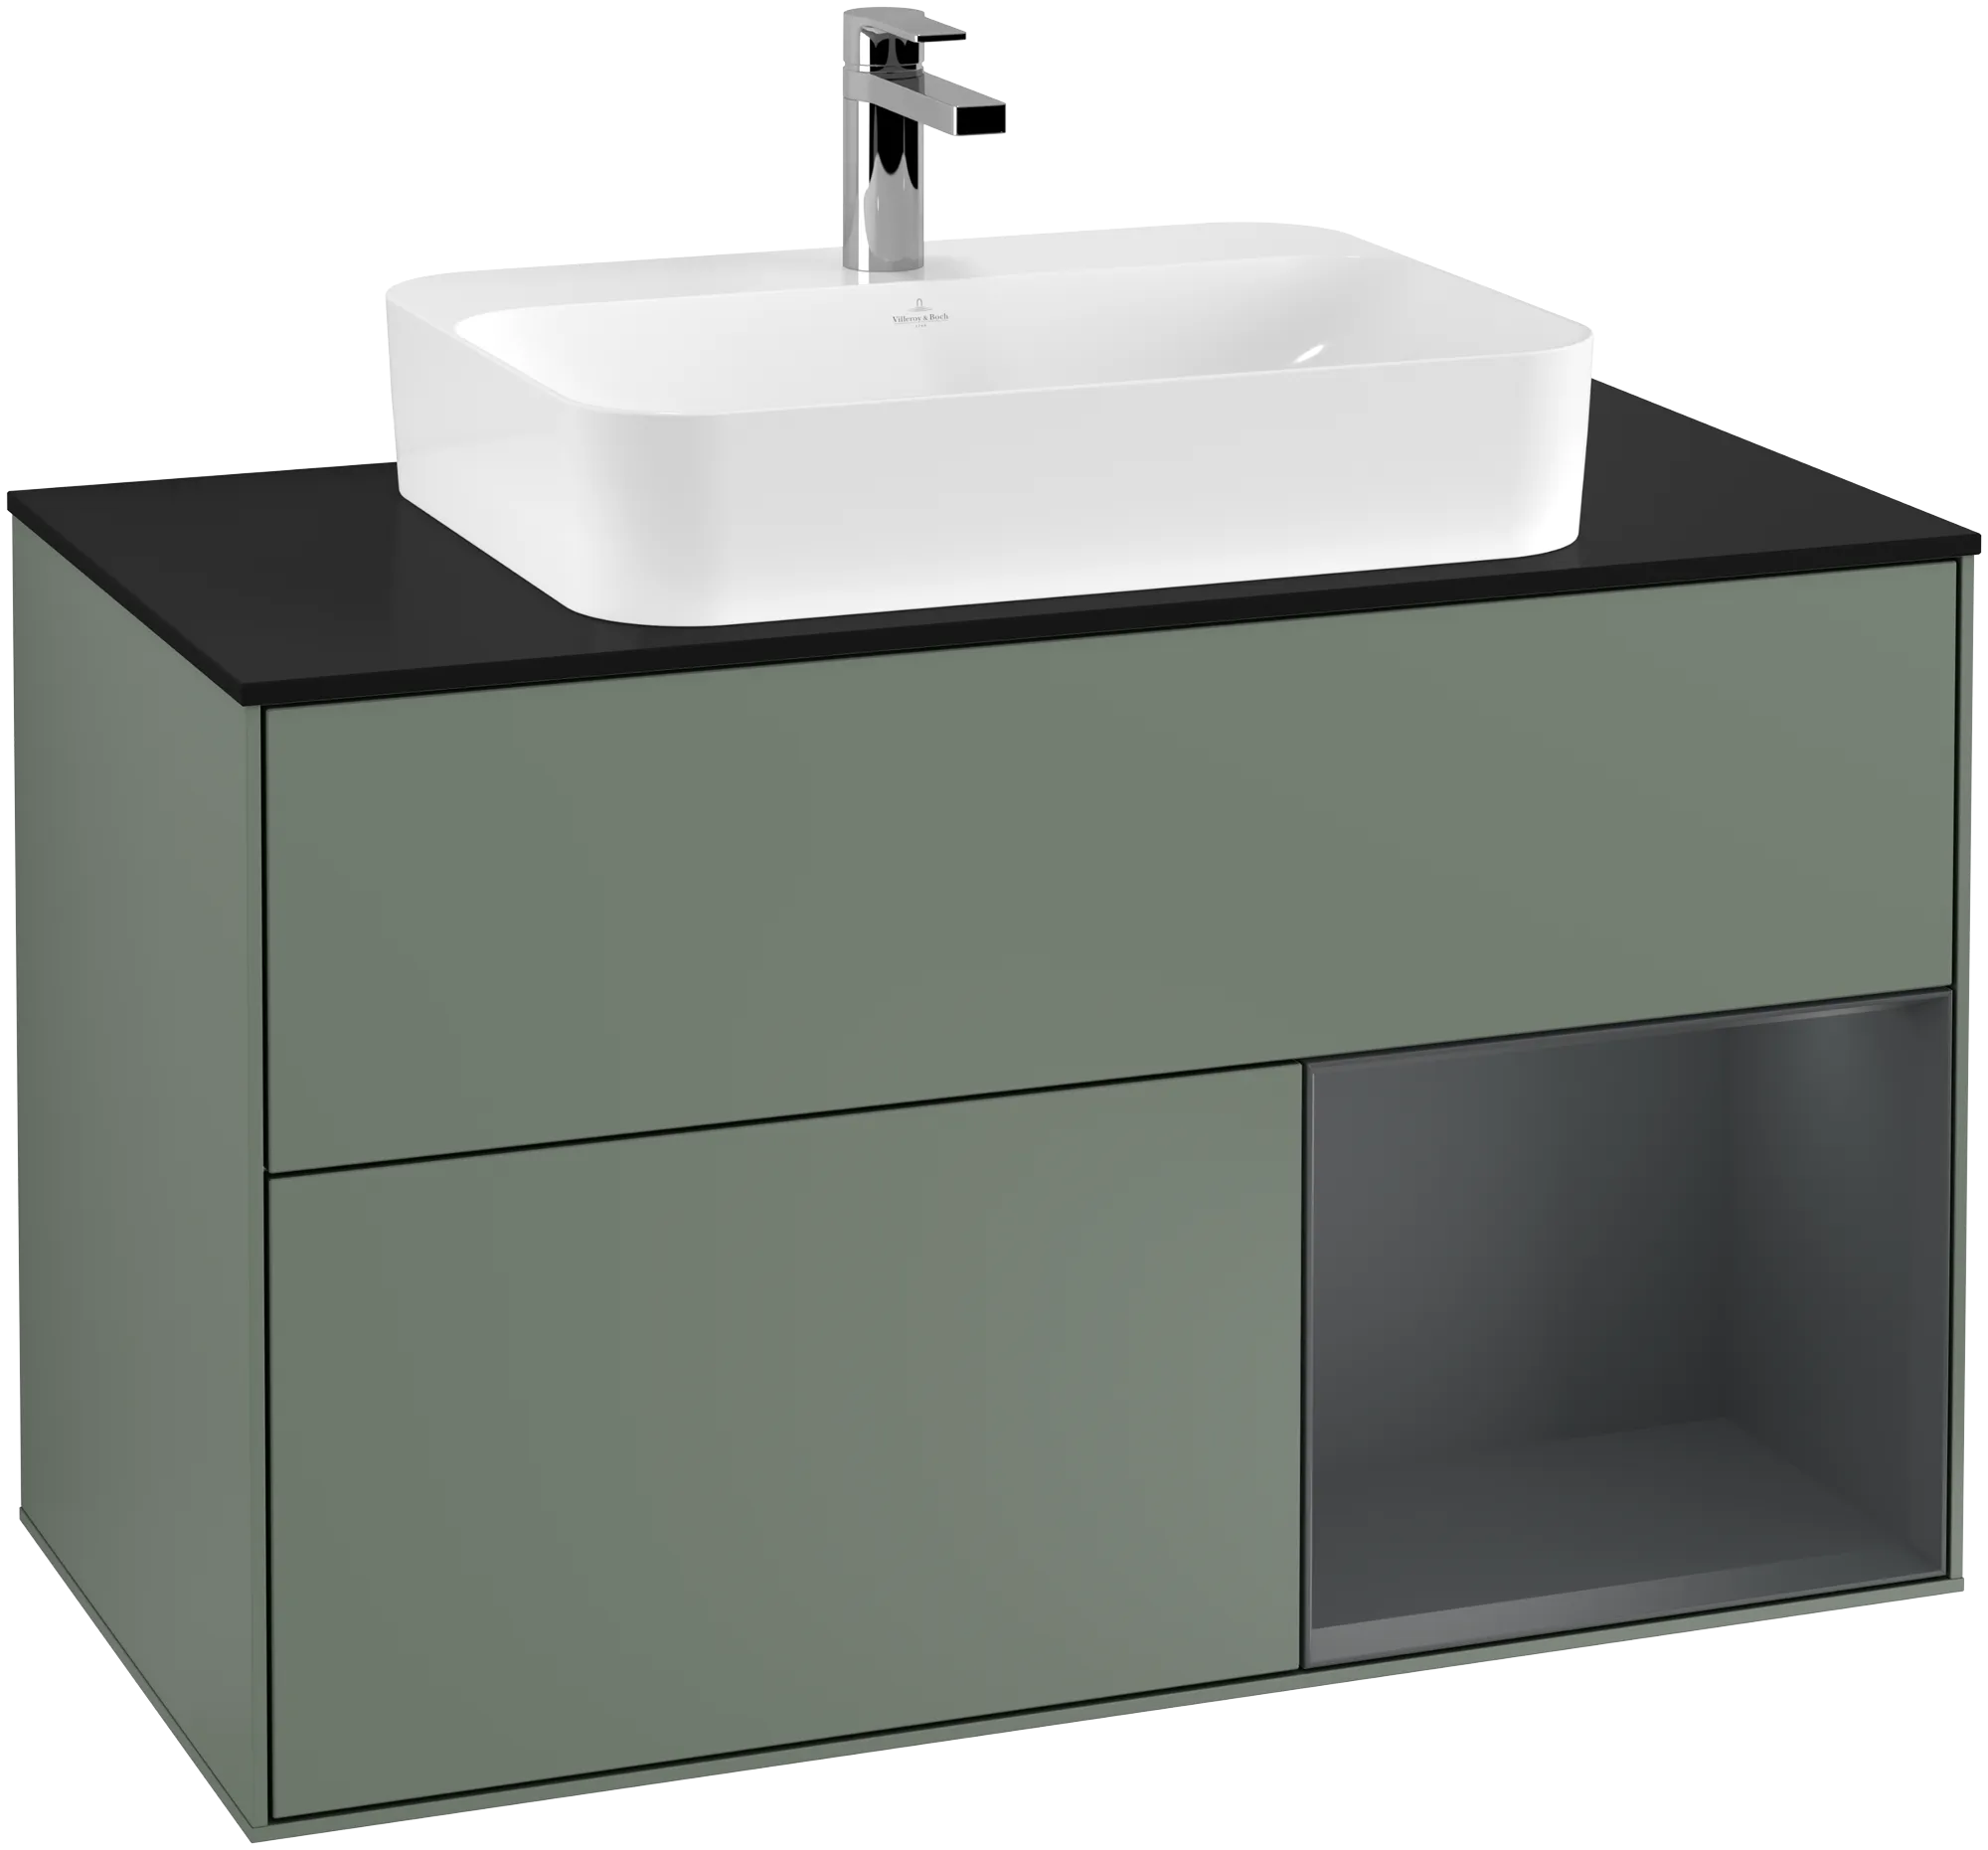 Picture of VILLEROY BOCH Finion Vanity unit, with lighting, 2 pull-out compartments, 1000 x 603 x 501 mm, Olive Matt Lacquer / Midnight Blue Matt Lacquer / Glass Black Matt #G372HGGM